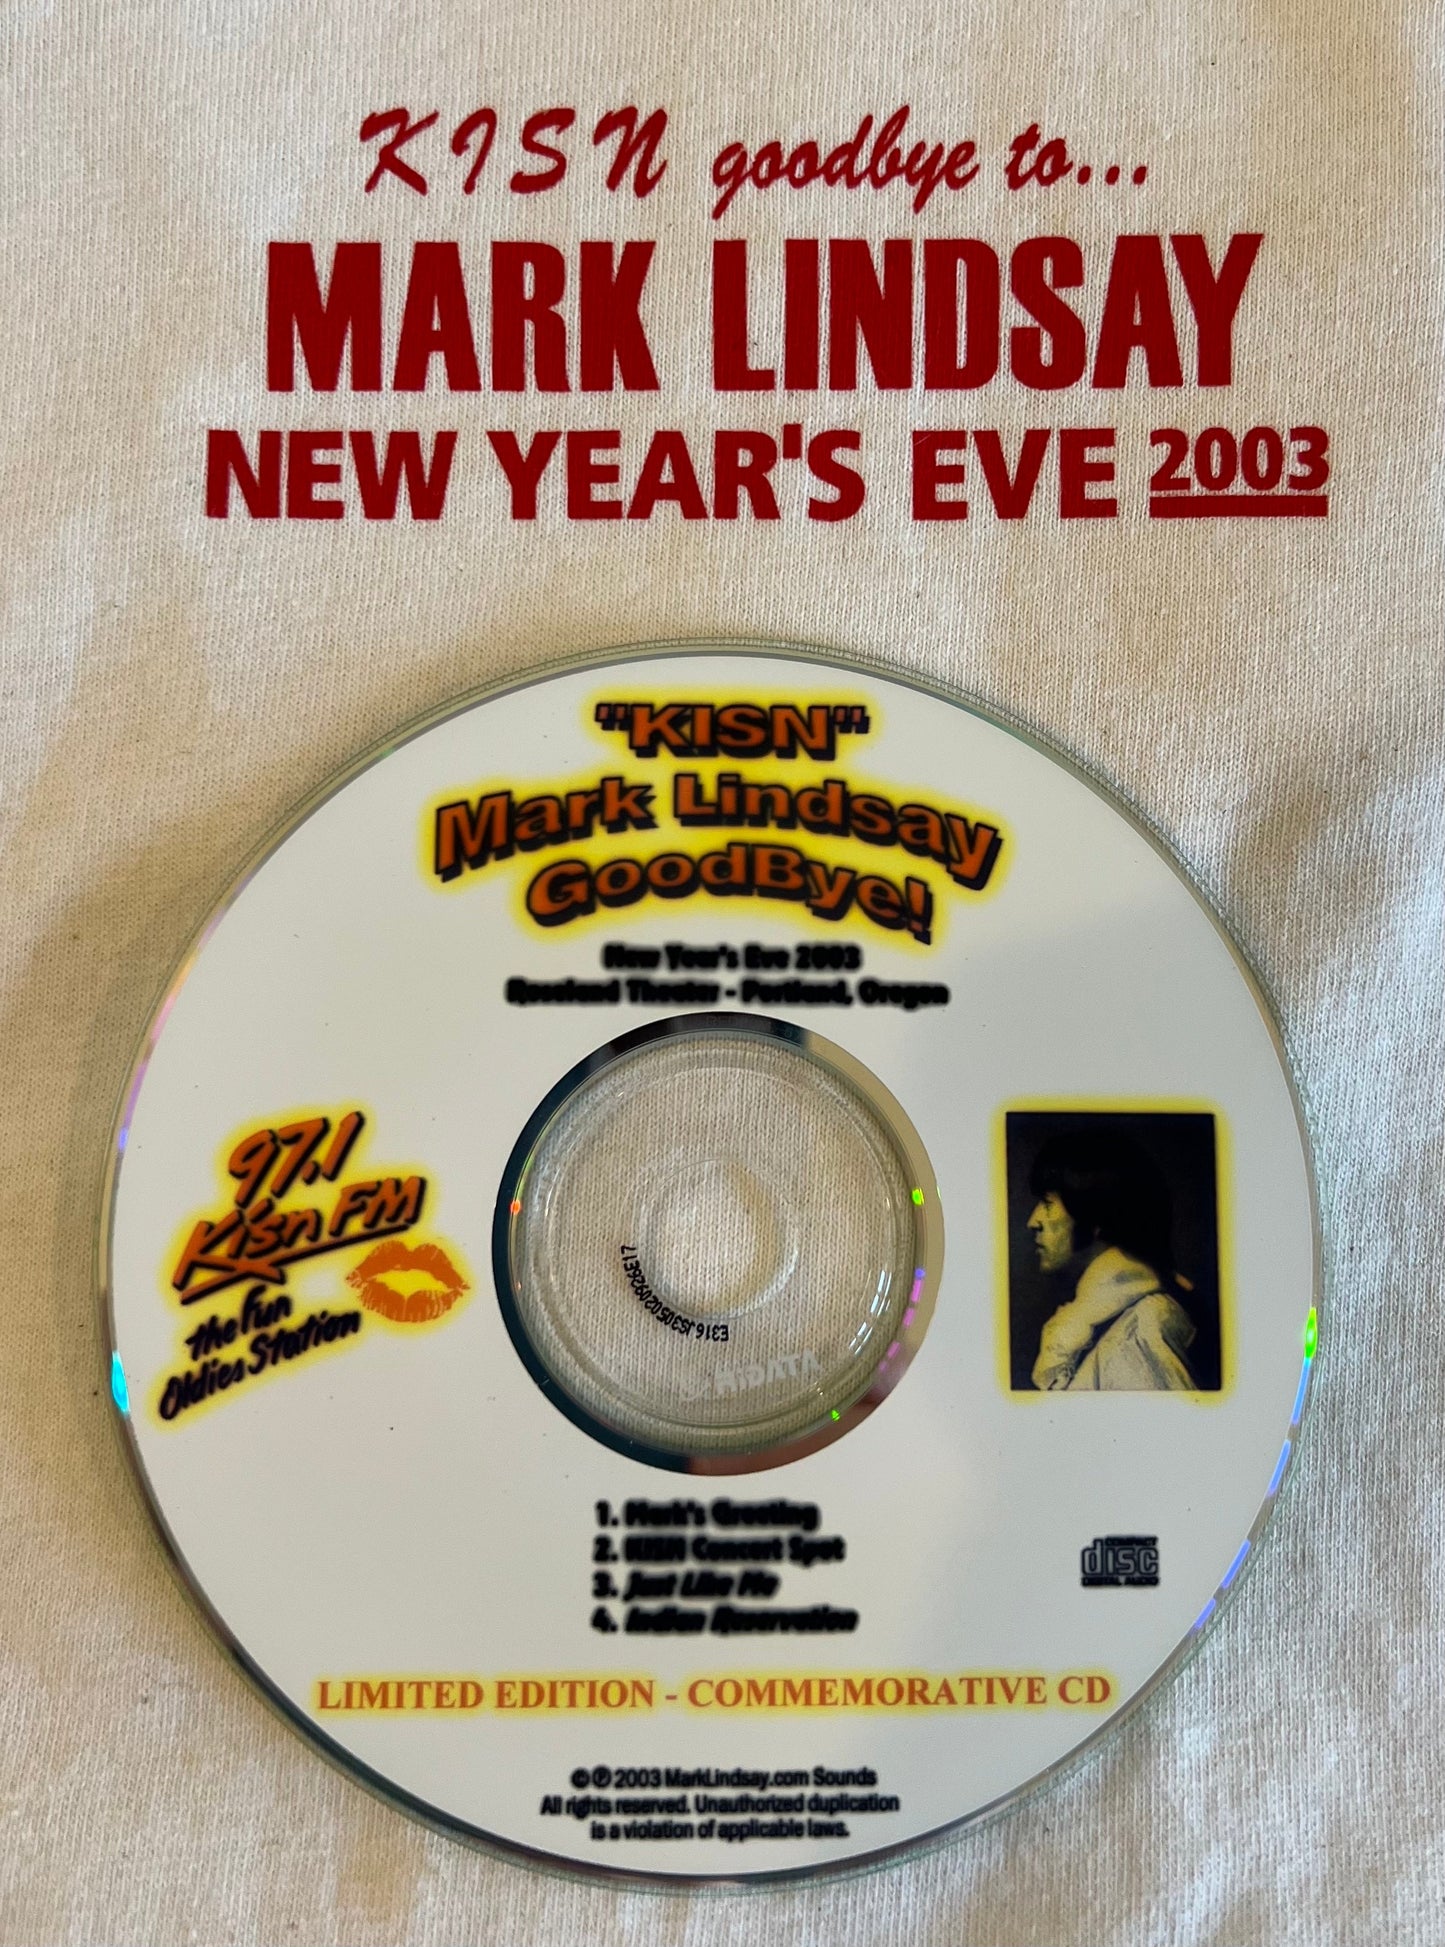 2003 New Year's Eve T-Shirt Ladies Size 2XL + Ltd Ed Promo CD + New Year's Card - Personally Autographed to YOU by Mark Lindsay